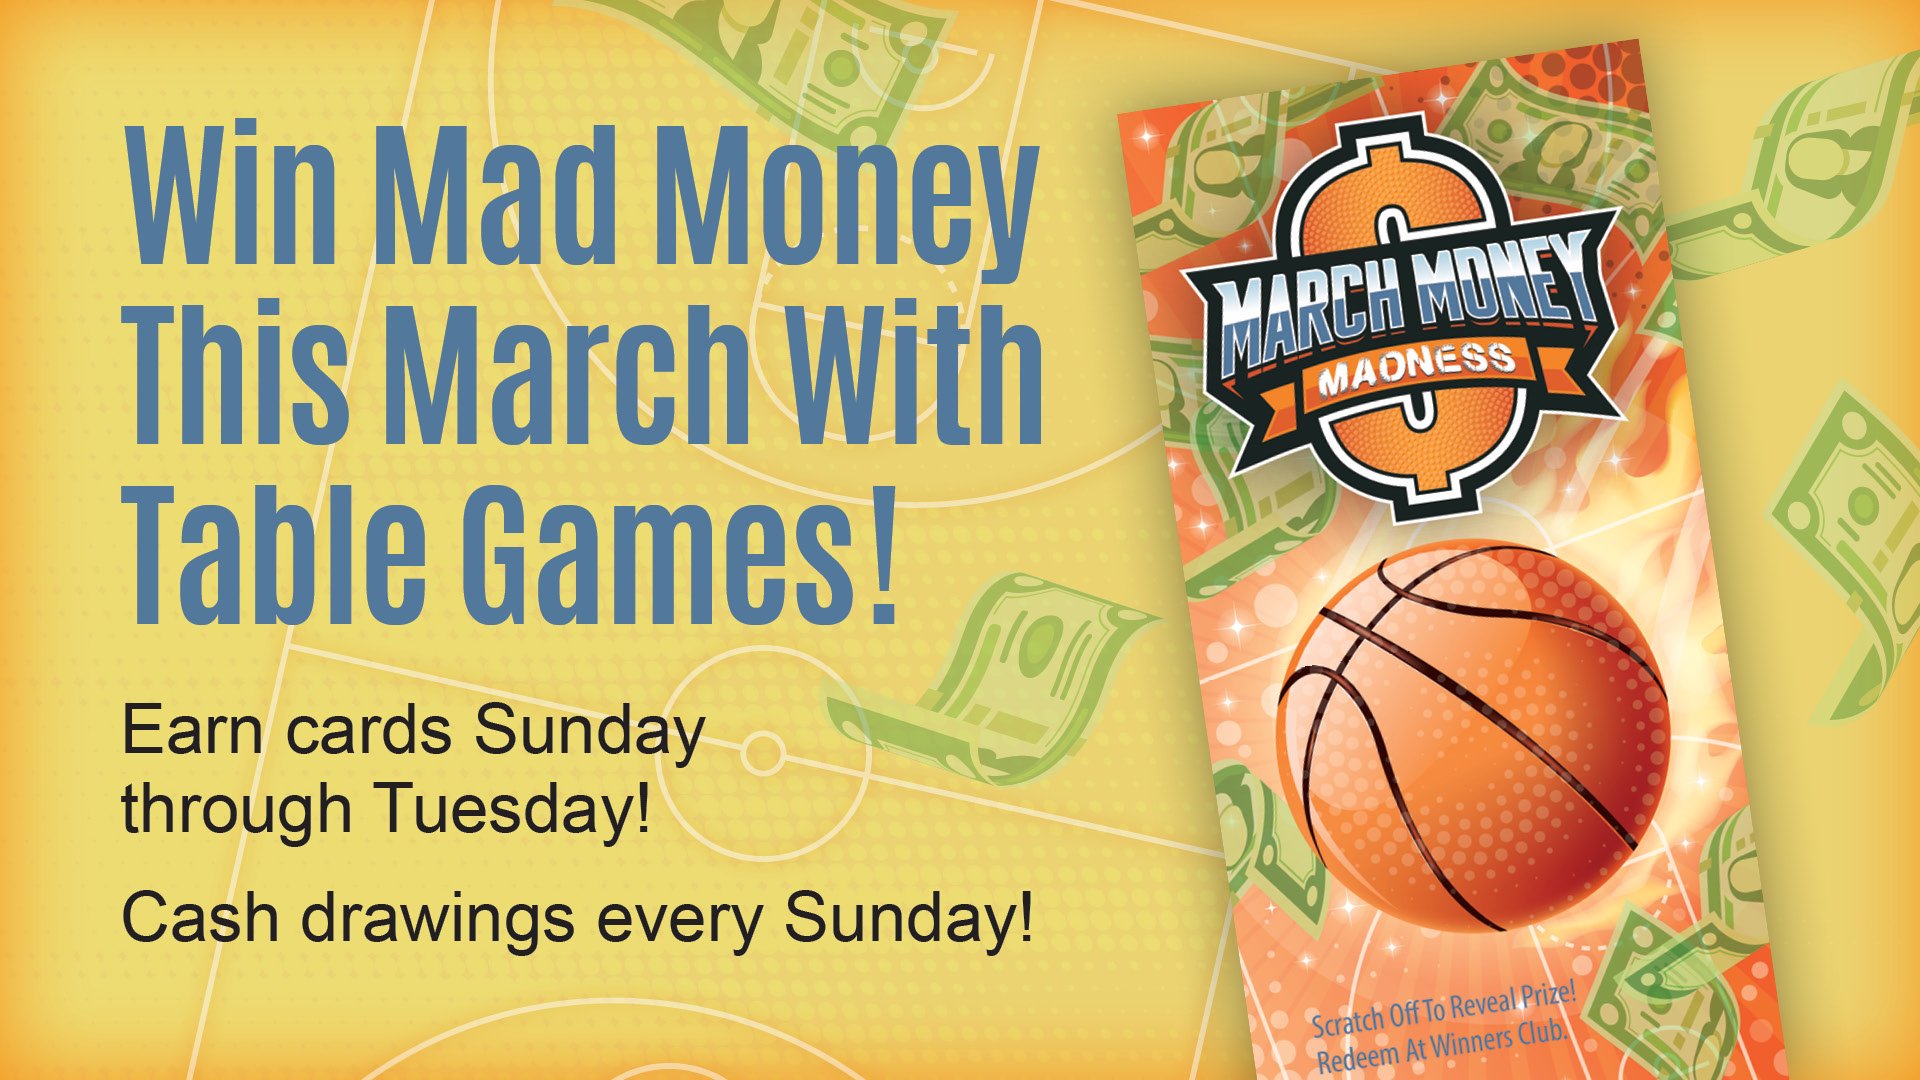 Earn cards to win Mad Money on Sundays at 7pm, 8pm. & 9pm